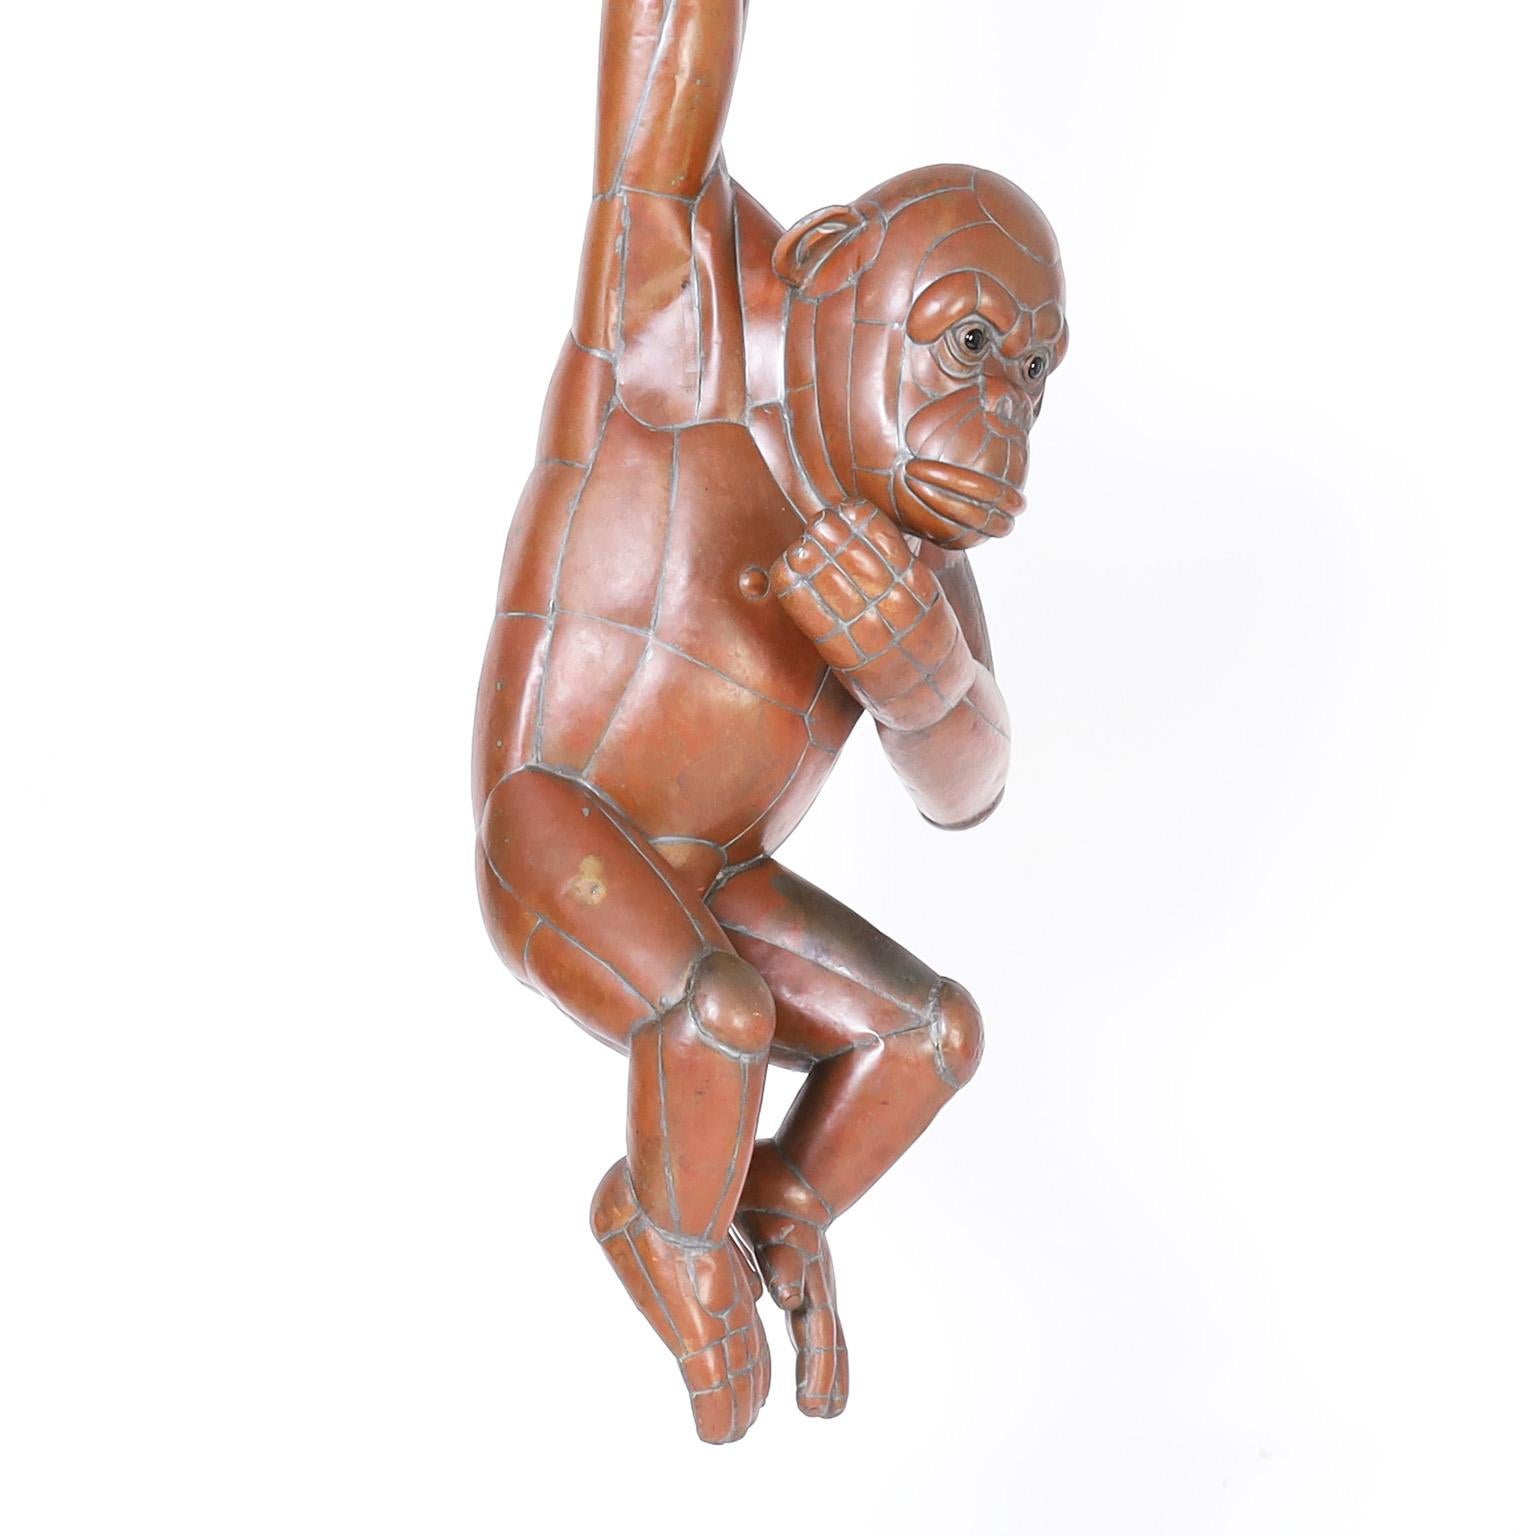 Striking mid century sculpture of a chimpanzee hanging from a trapeze, crafted in copper by Sergio Bustamante with both whimsy and stylized accuracy and having an acquired bronze like sculptural patina. Signed Sergio Bustamante 47/100.